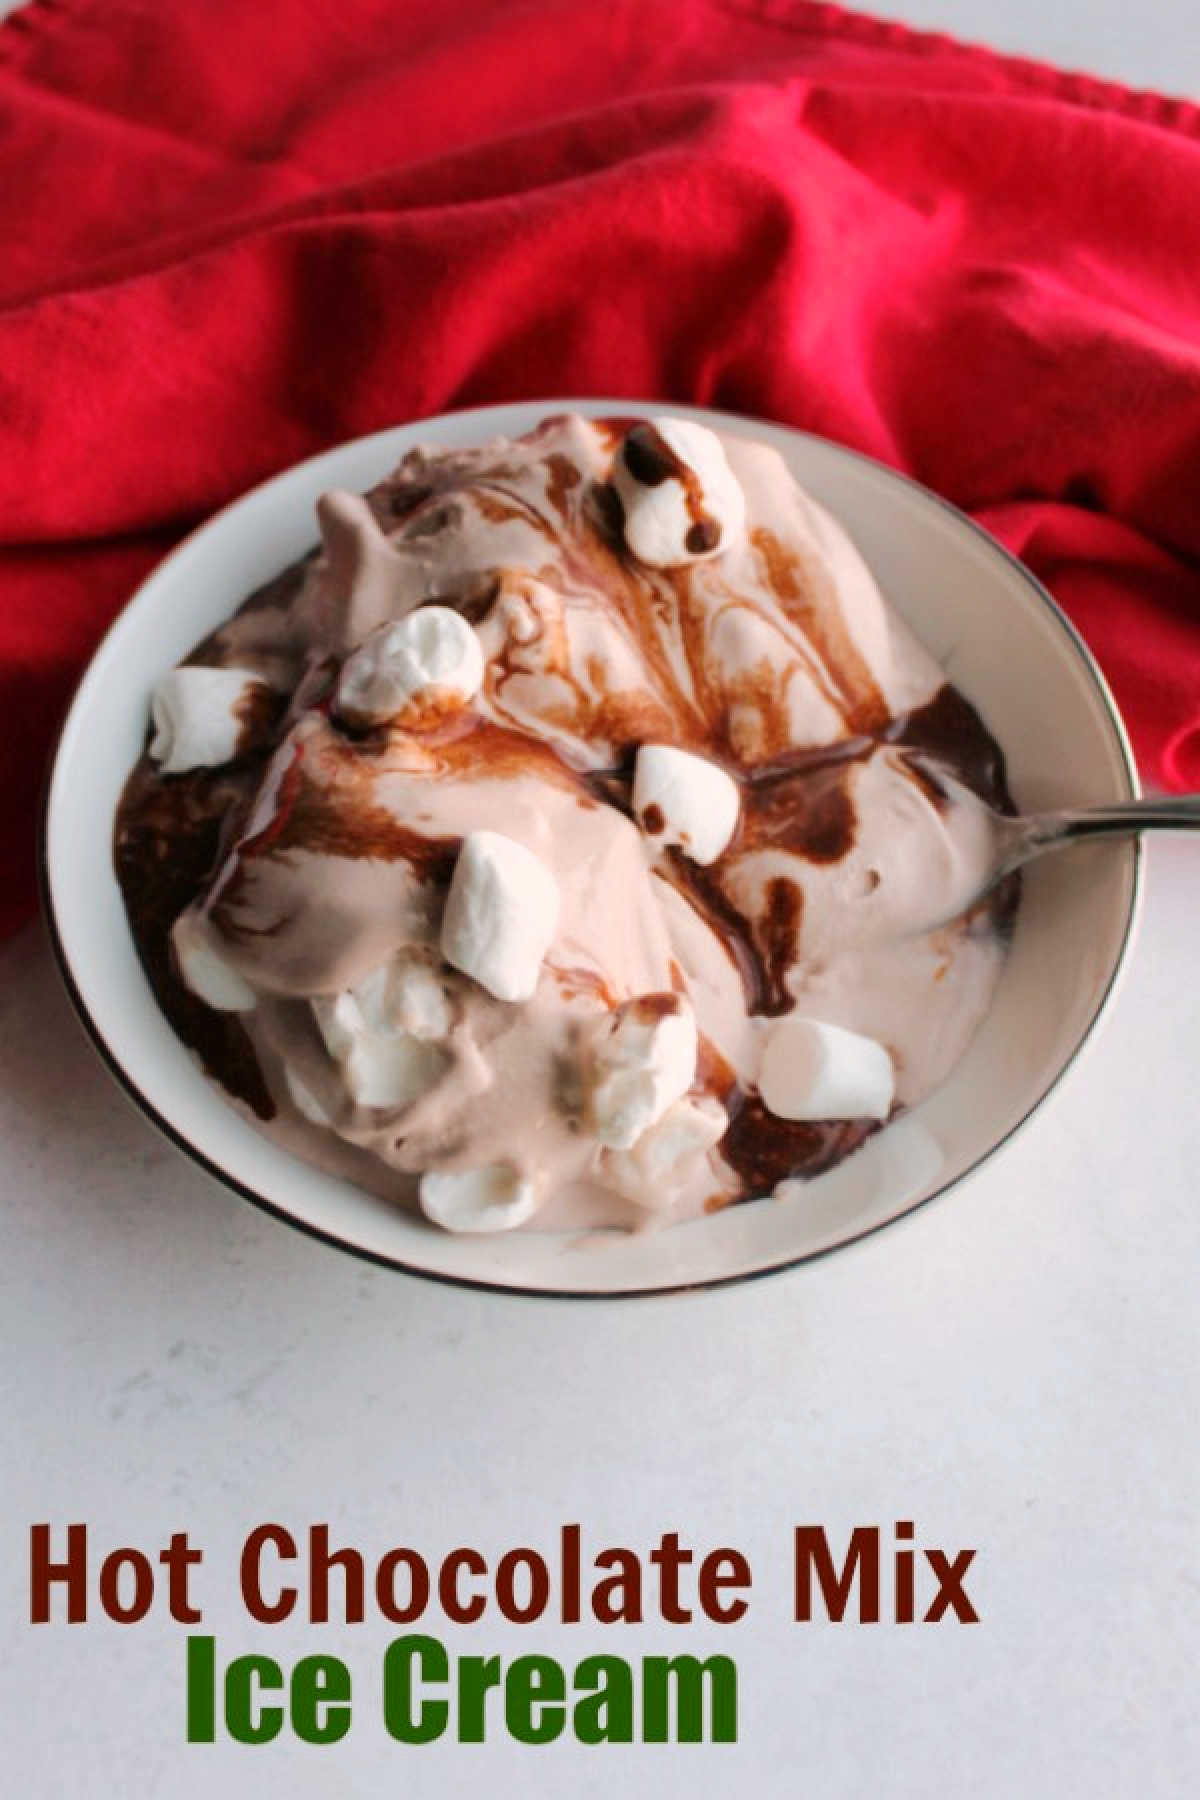 Super creamy homemade chocolate ice cream flavored with hot chocolate mix and marshmallows. It's a great way to use the extra hot cocoa mix in the pantry and transition it from a winter to a spring treat.